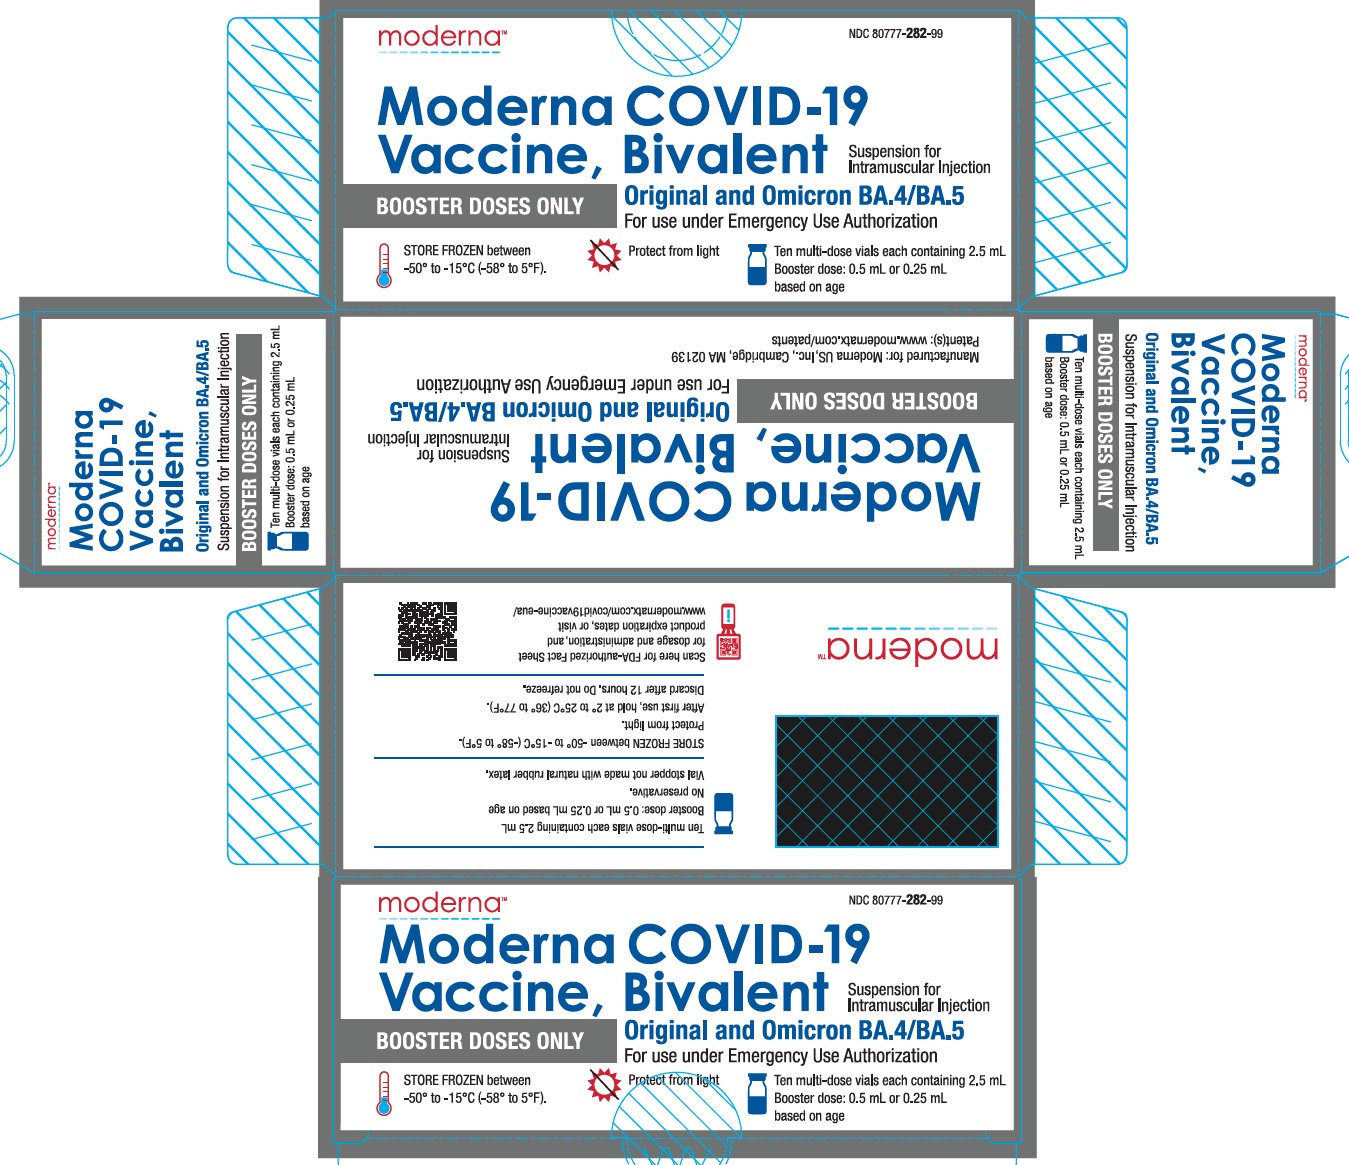 Moderna COVID-19 Vaccine, Bivalent Suspension for Intramuscular Injection for use under Emergency Use Authorization-Booster Doses Only-Multi-Dose 2.5 mL Vial Label